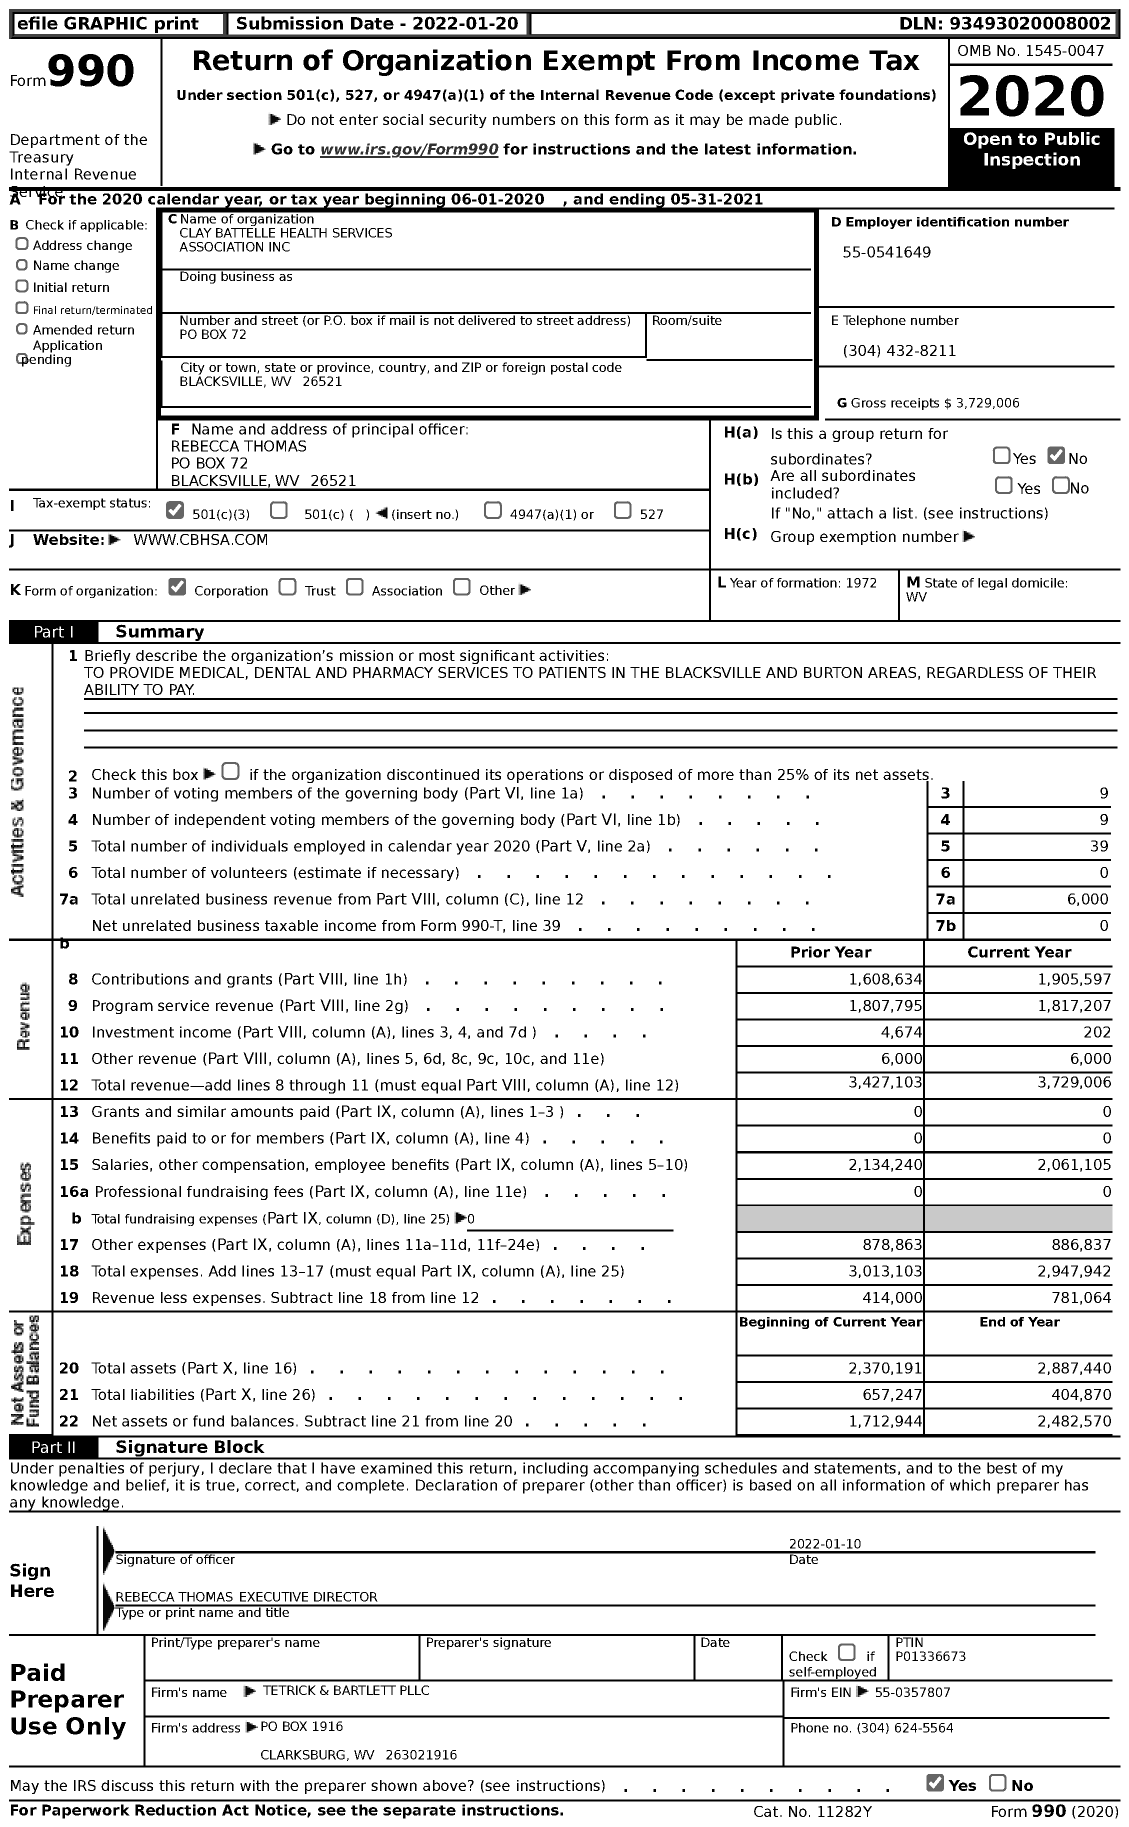 Image of first page of 2020 Form 990 for Clay Battelle Health Services Association